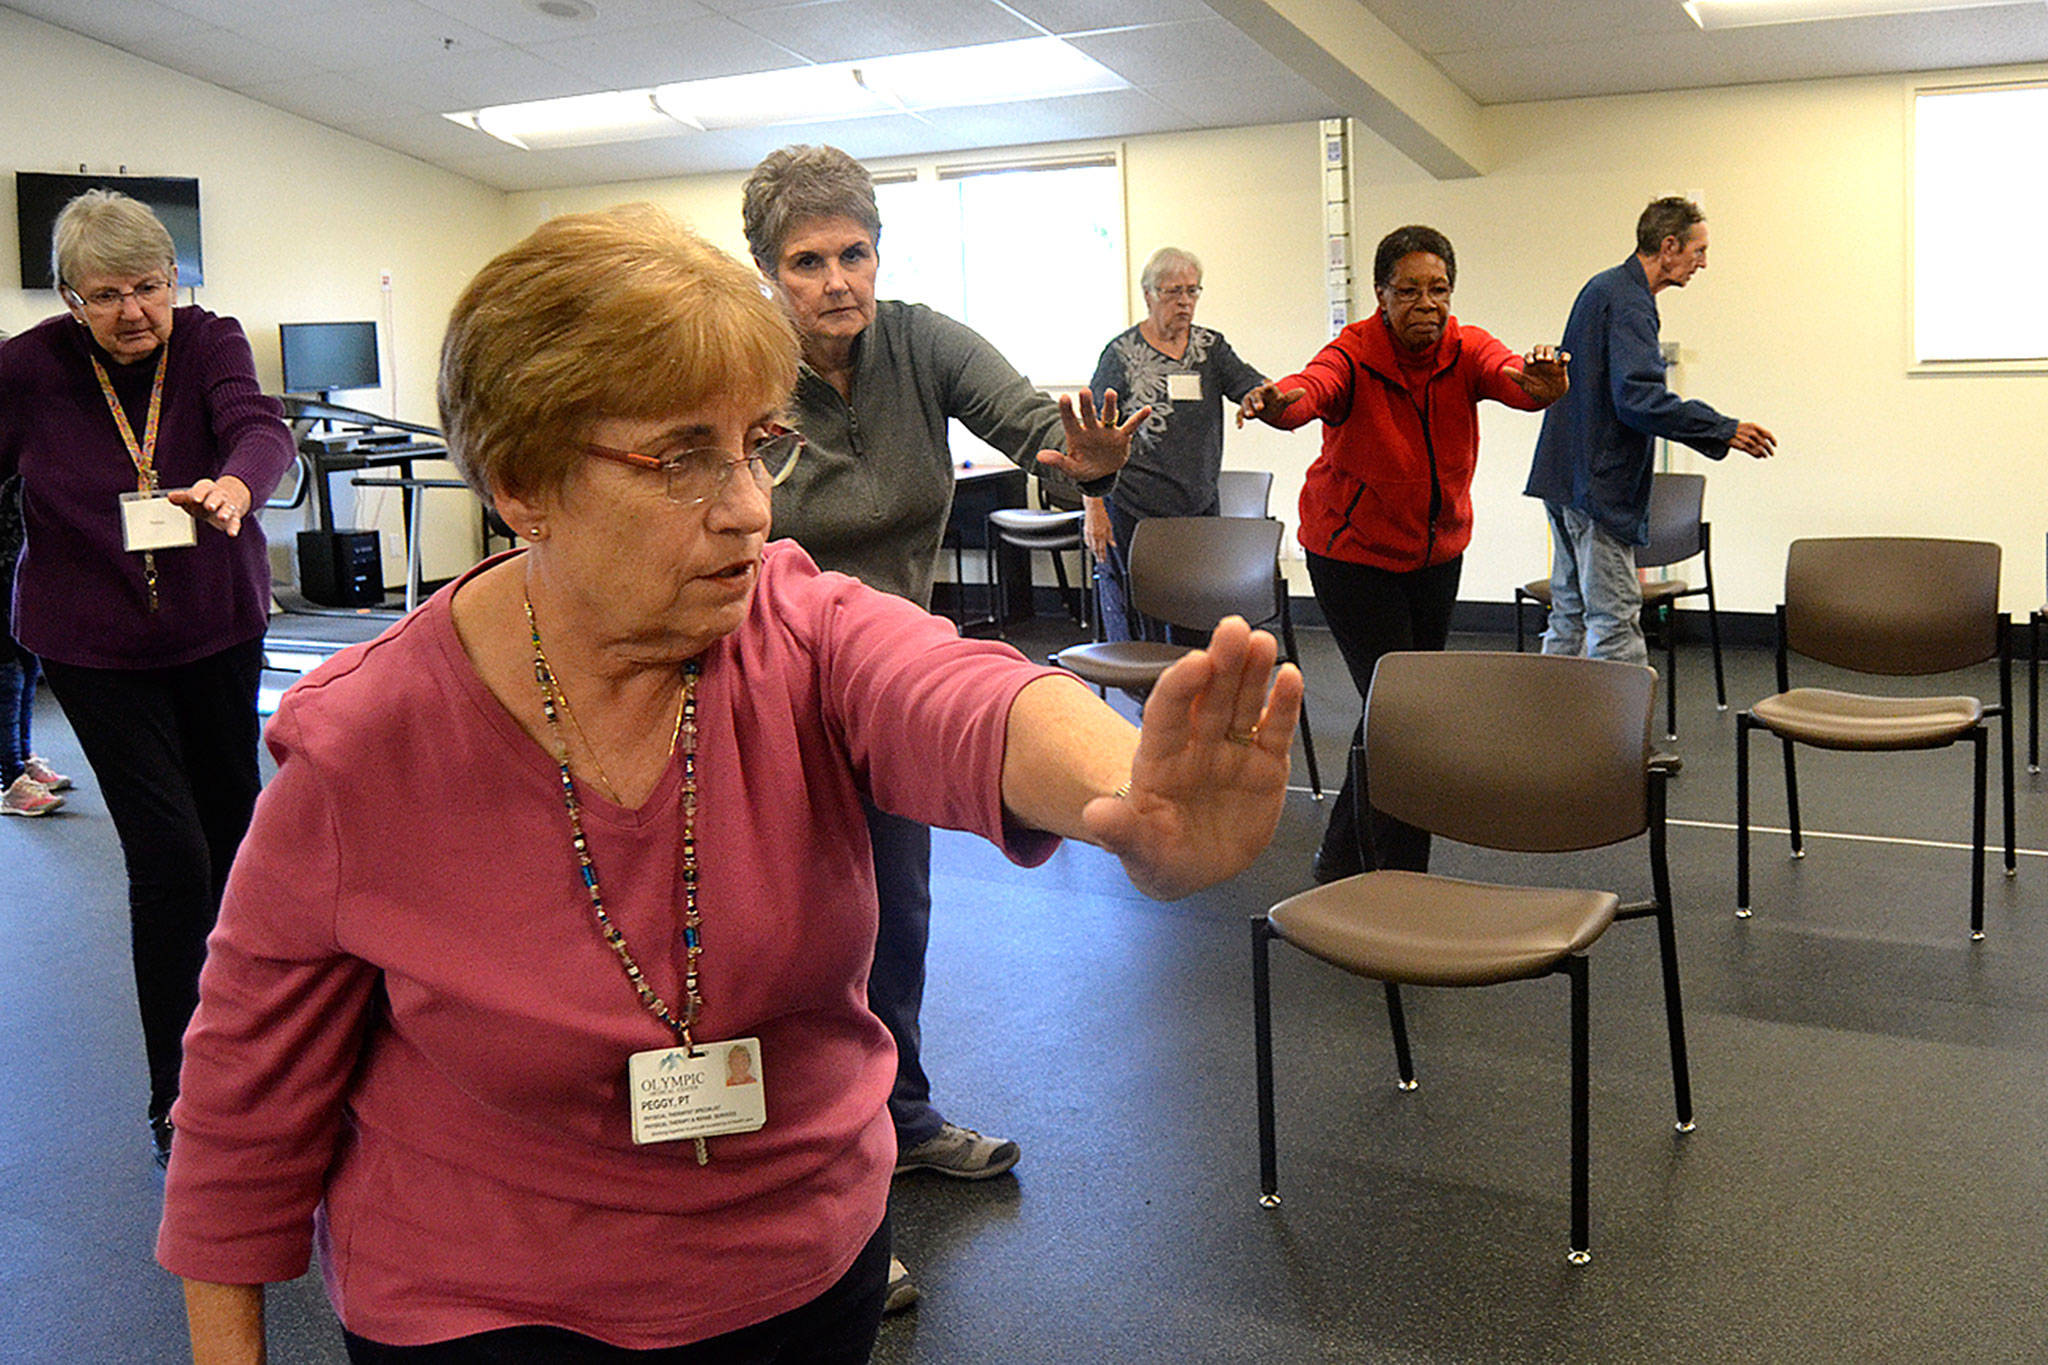 Tai Ji Quan continues at the YMCA through Olympic Medical Center’s Wellness Services program. Here, participants, from left, Helen Butler, physical therapist Peggy Scheideler, Sandy Sullivan, Sarah Thomas, Peggy Dawson, and Richard Thomas move together in the 23rd week of a 24 week class to help prevent falls. (Matthew Nash/Olympic Peninsula News Group)